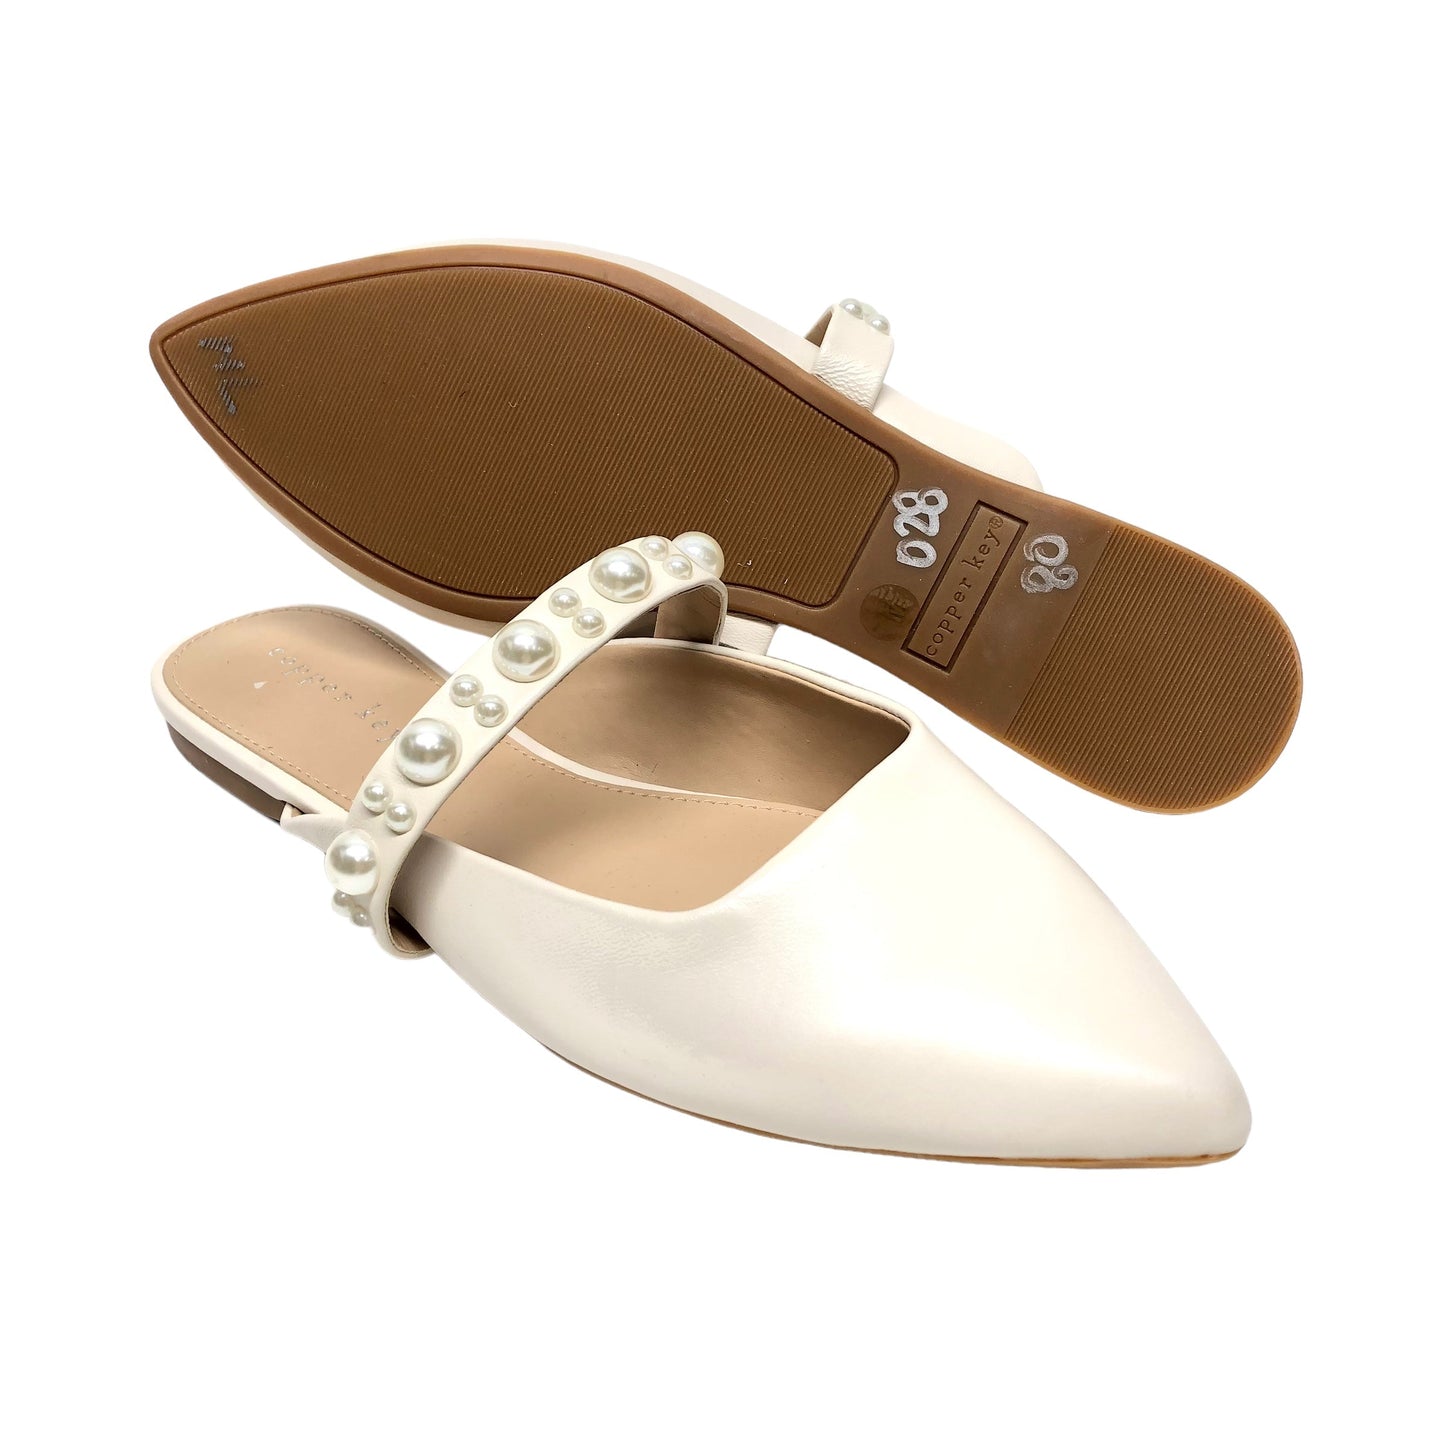 Shoes Flats By Copper Key  Size: 7